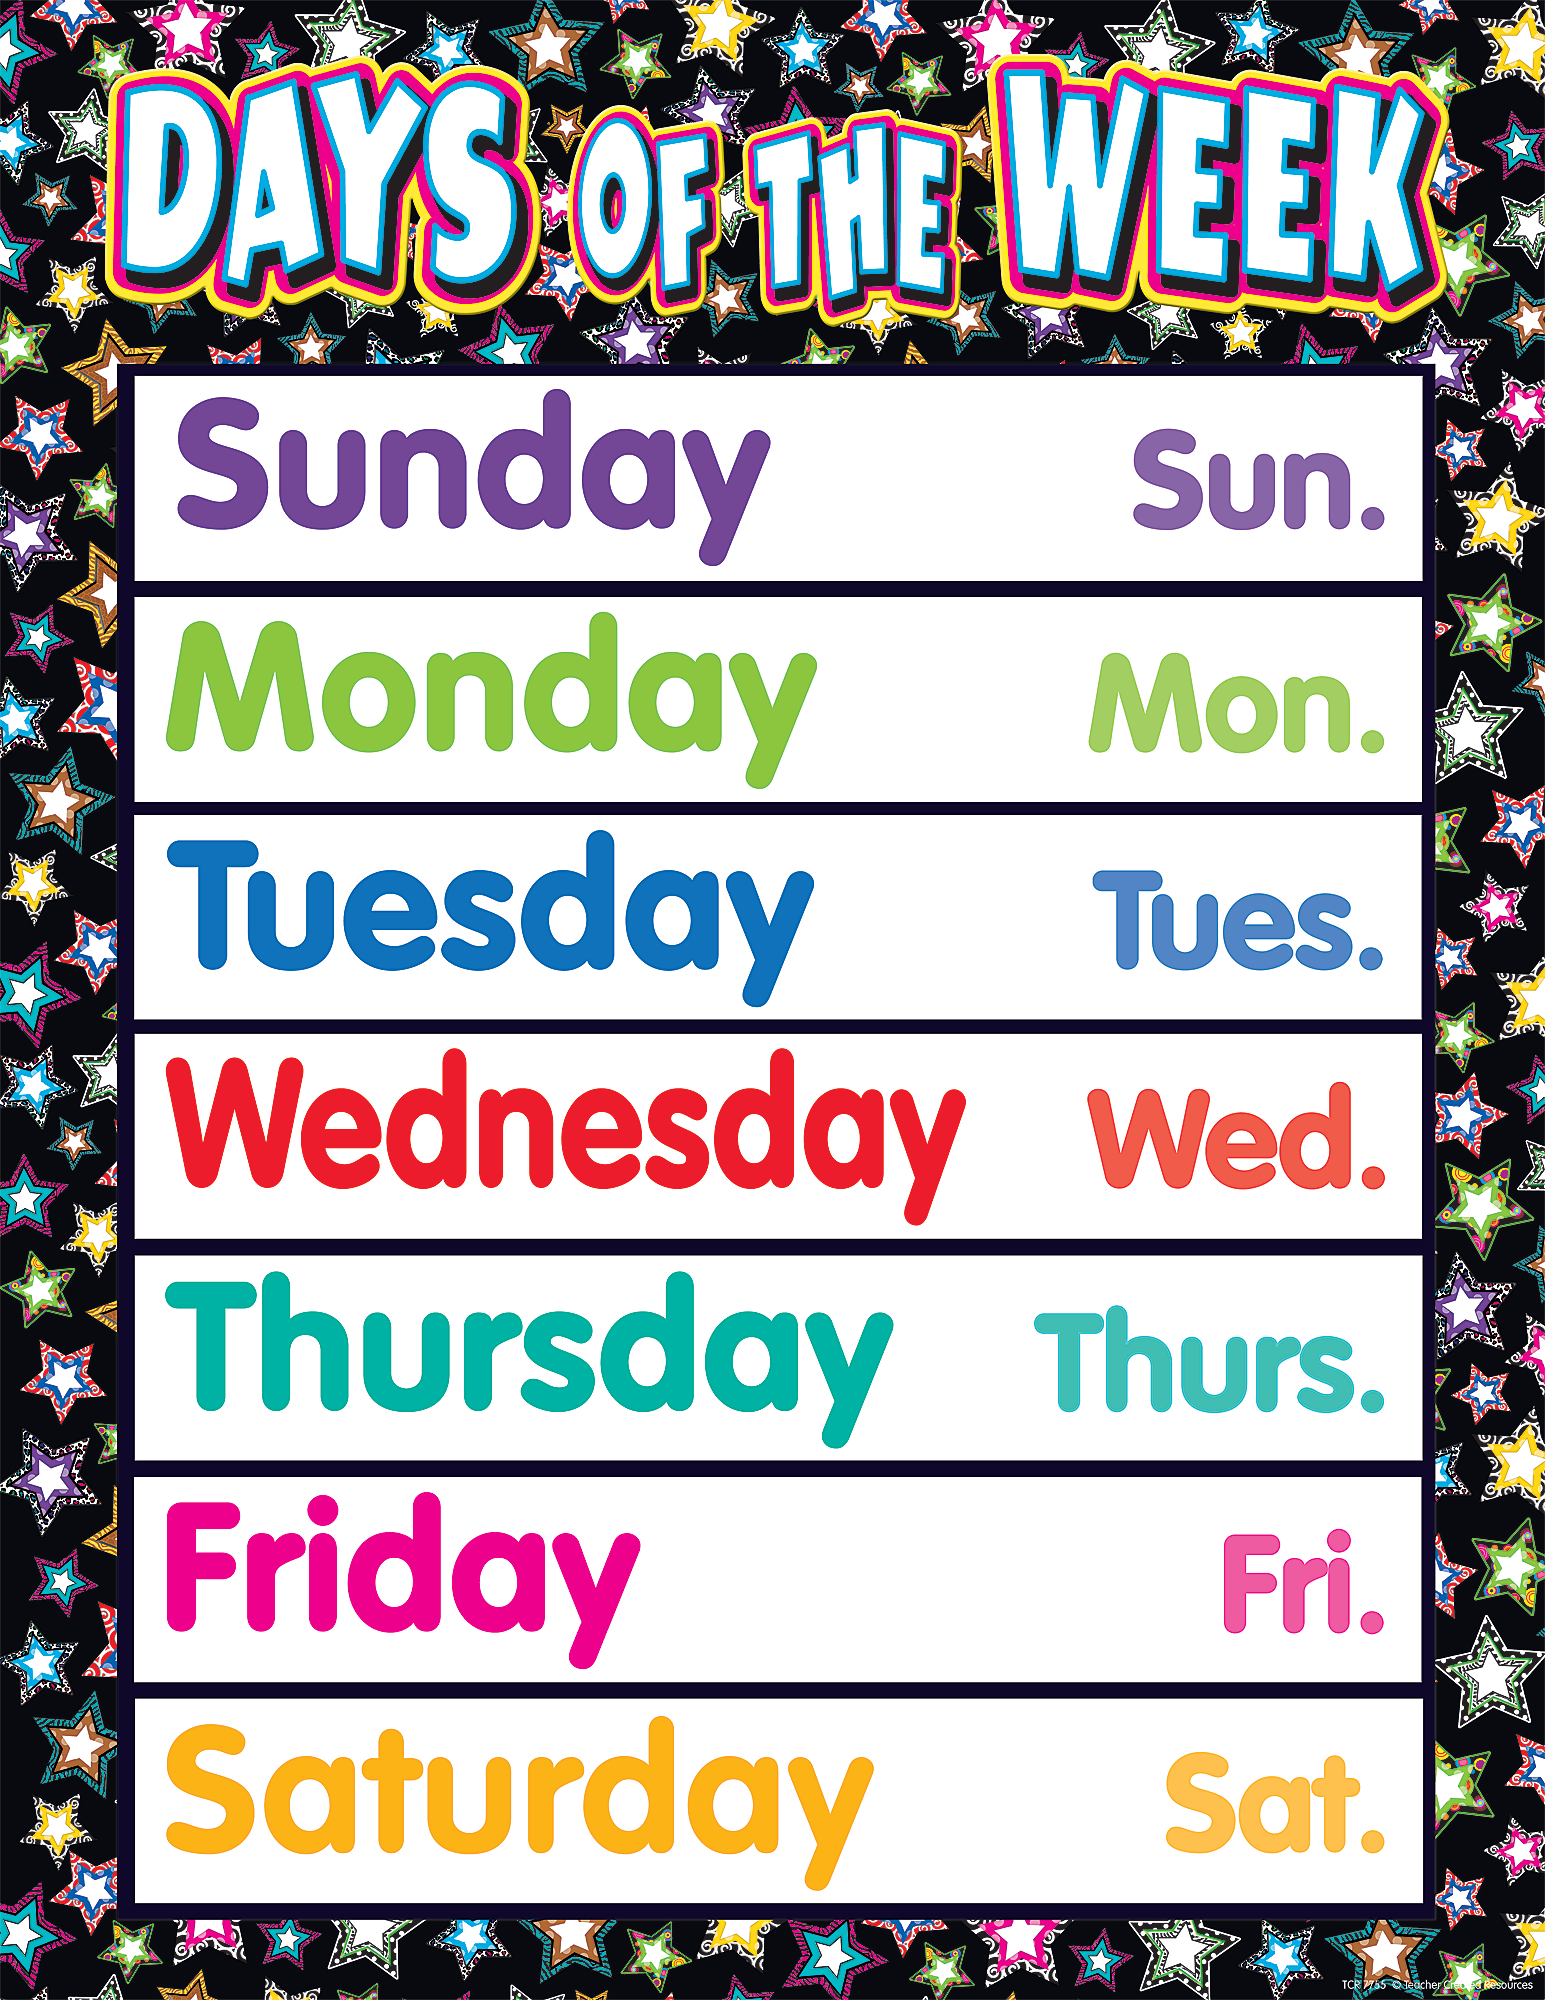 Week это. Days of the week. Days of the week картинки. Week Days name. Days of the week Chart.